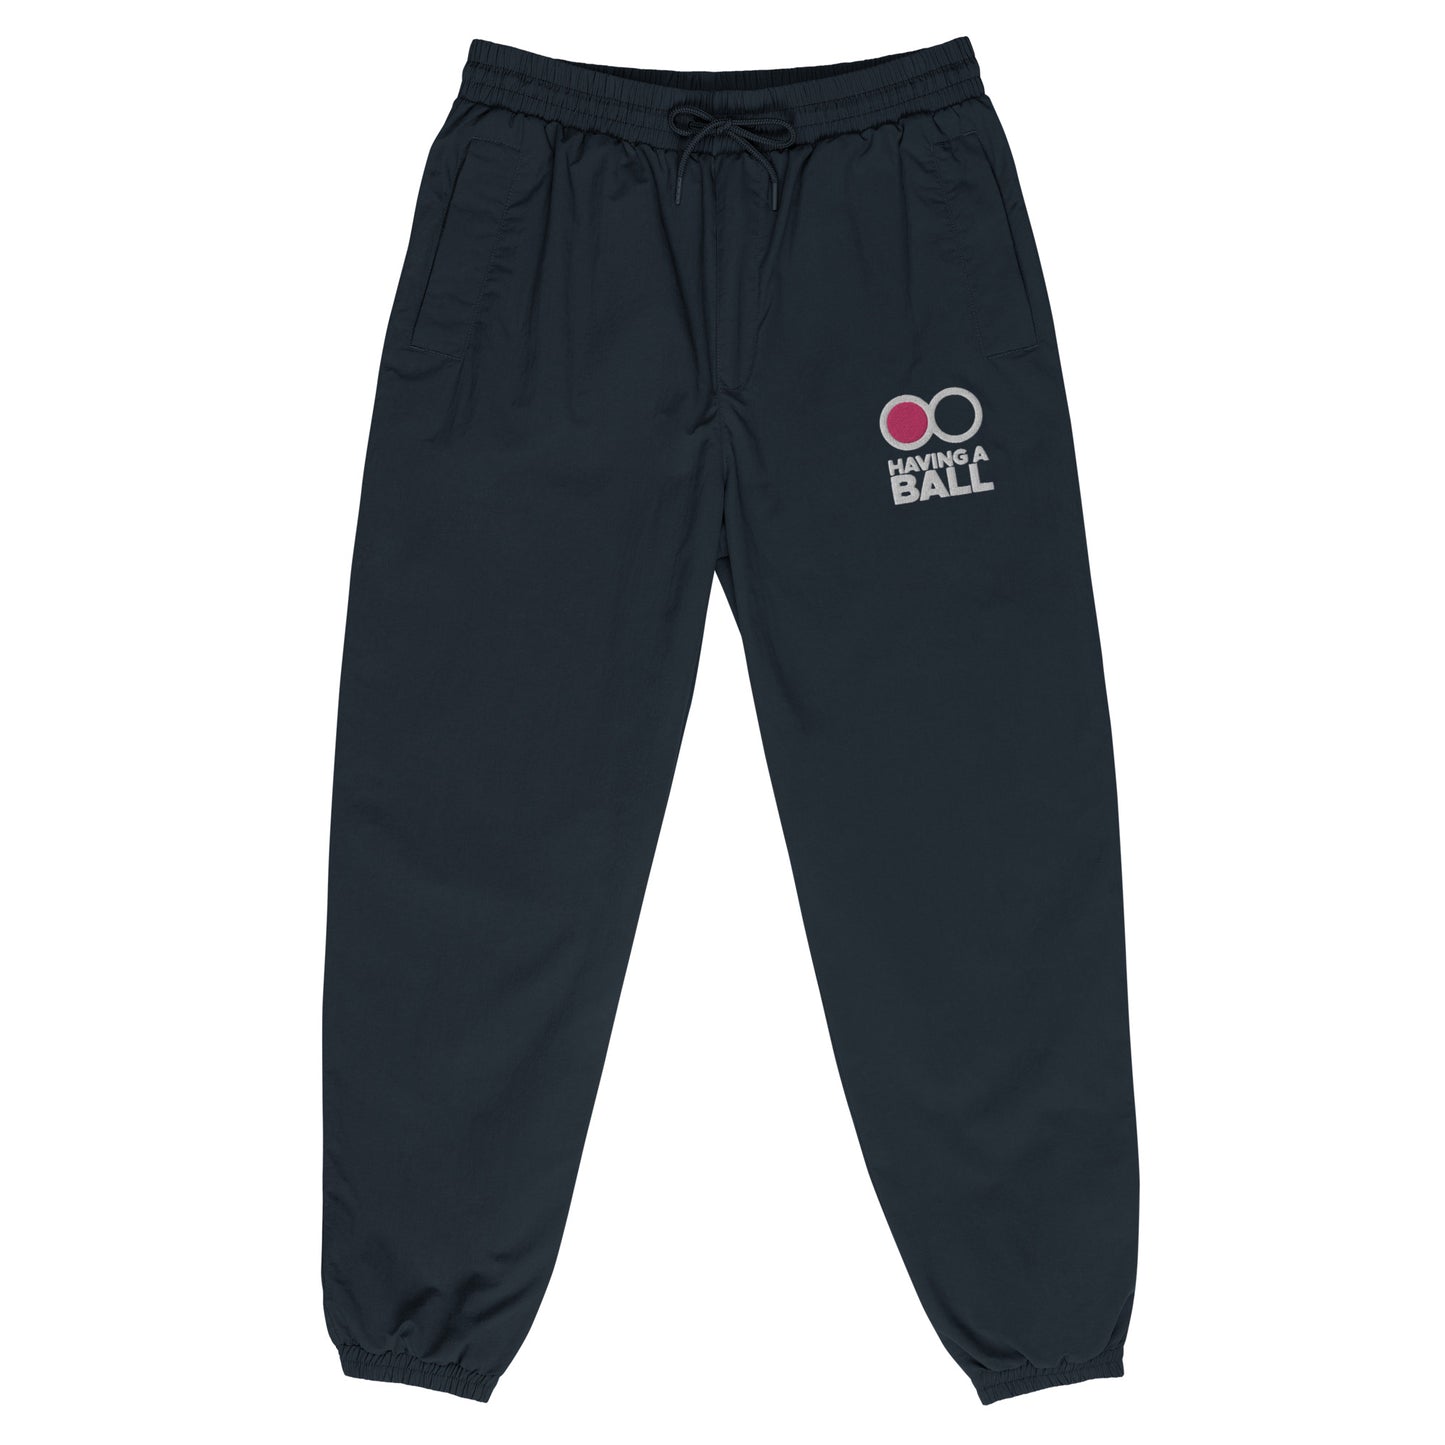 Having A Ball - Tracksuit Trousers (Unisex)